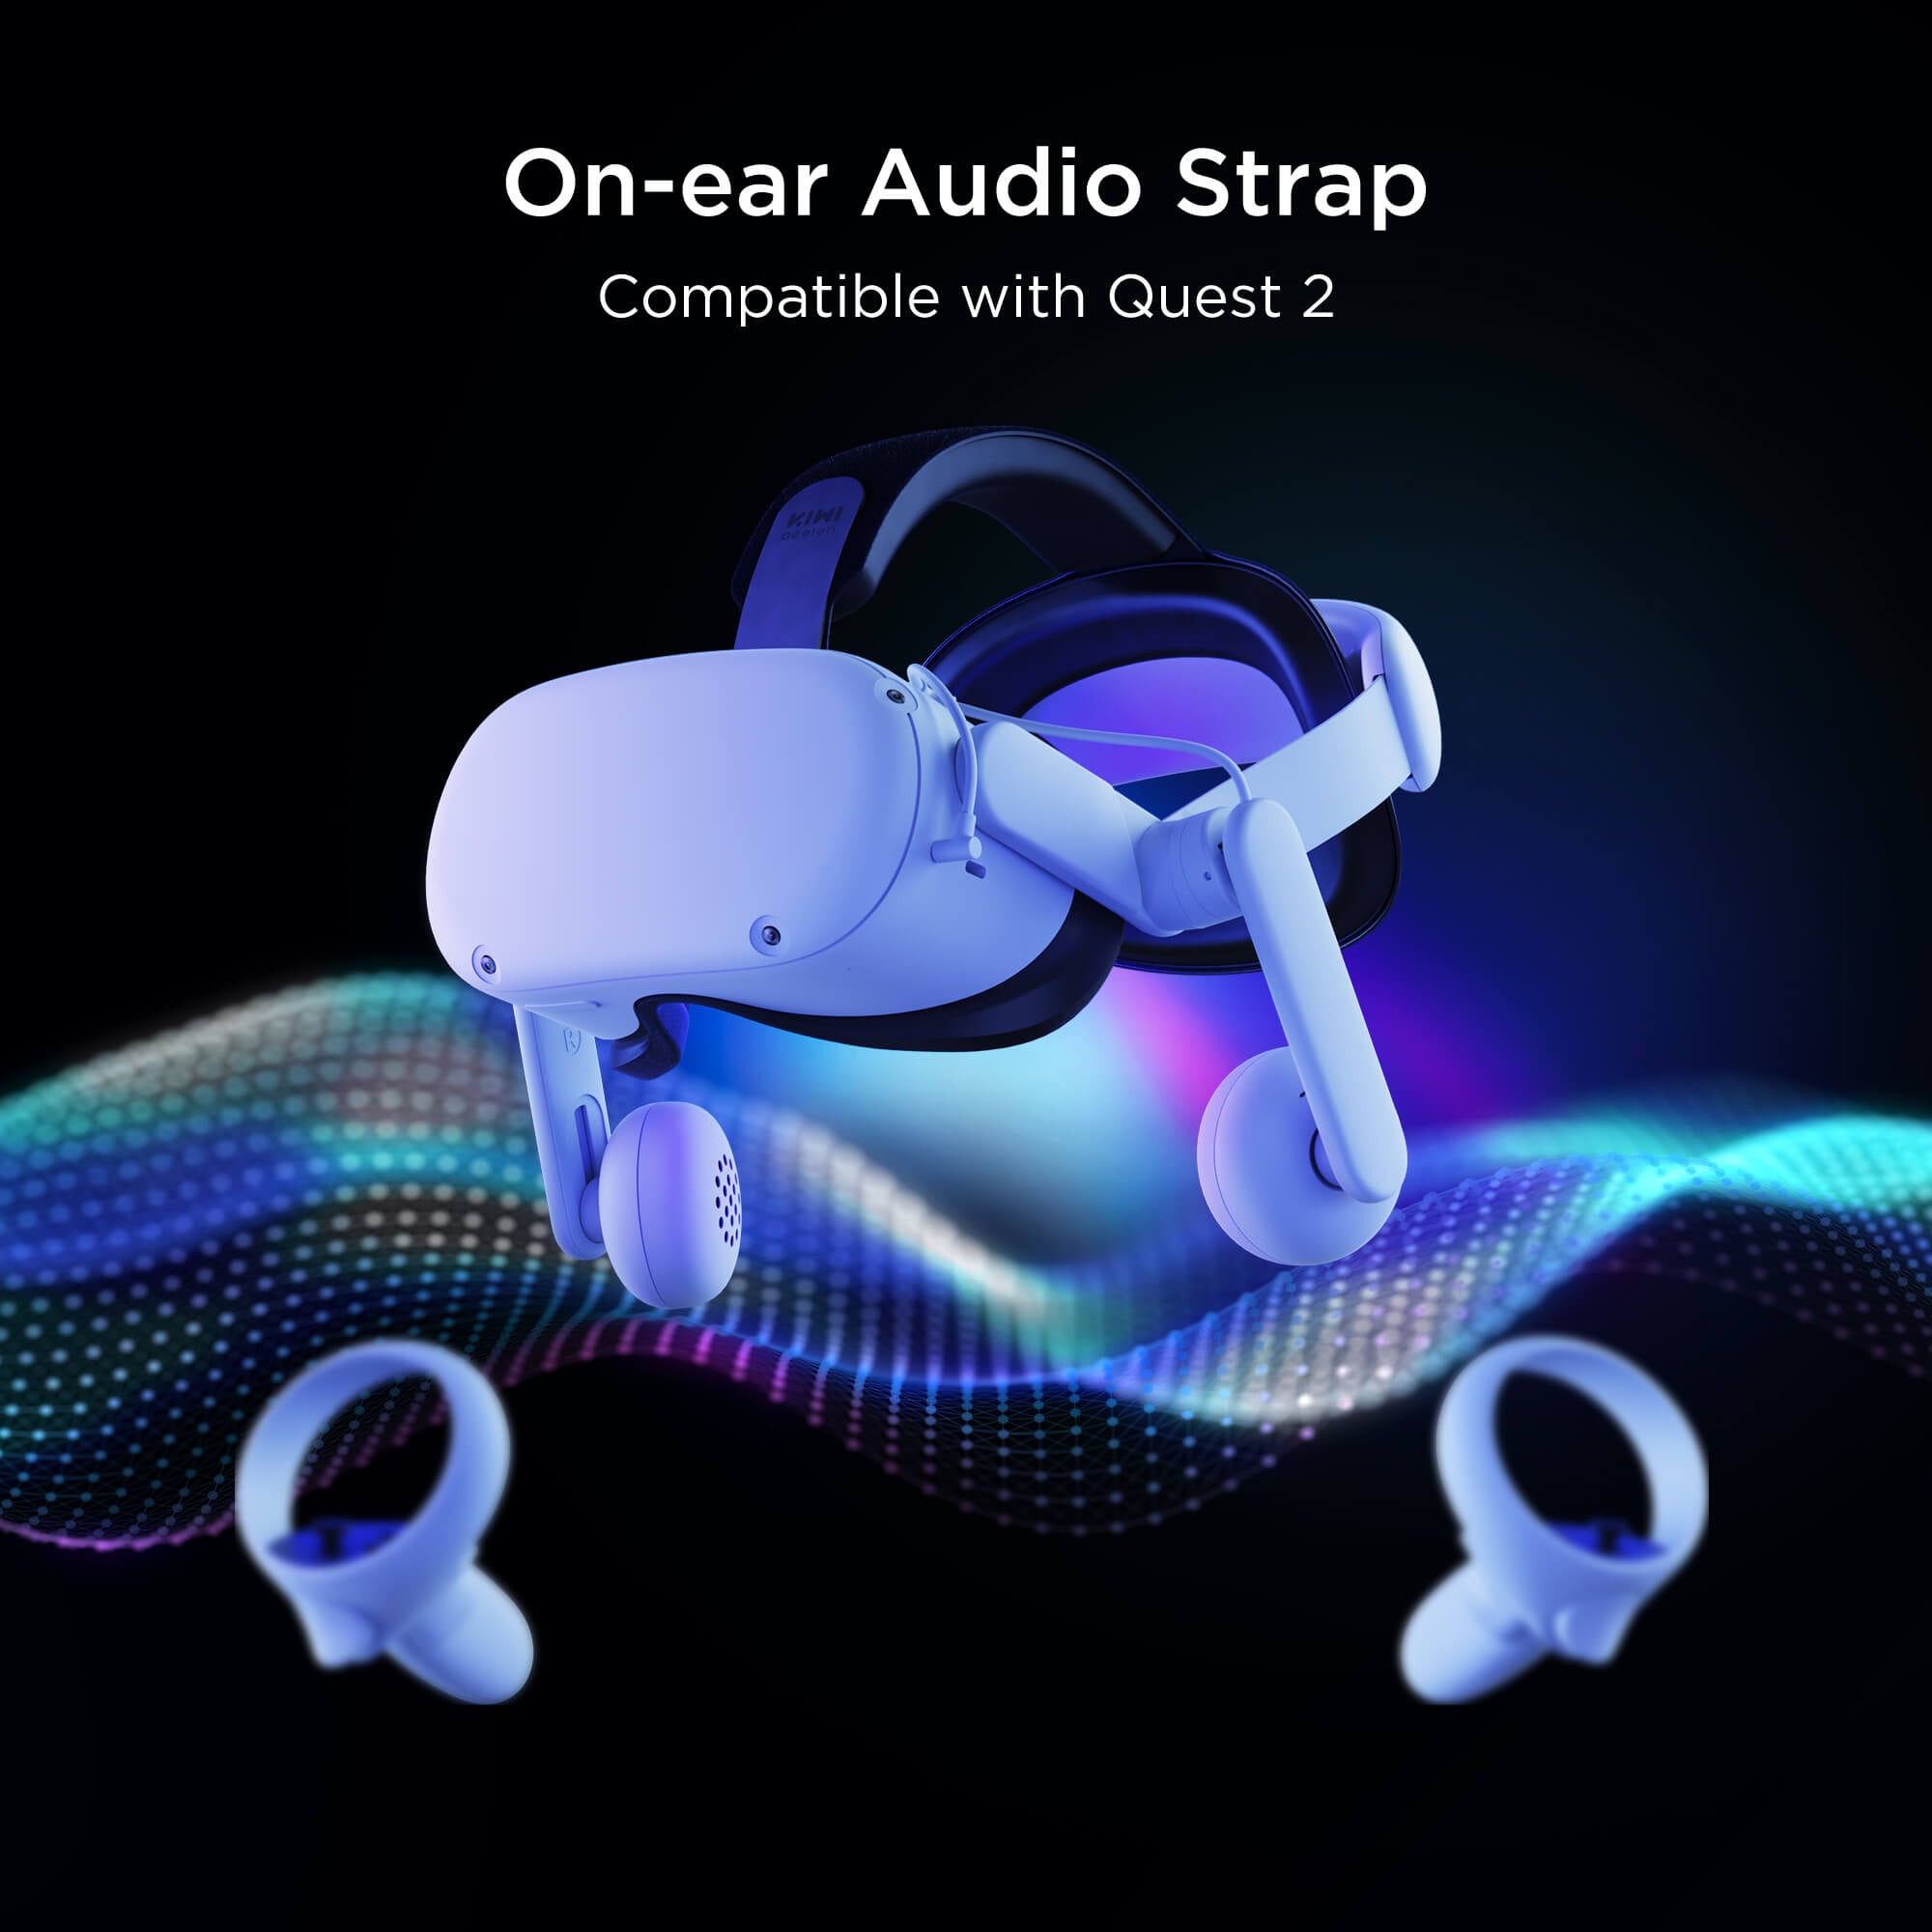 On-Ear Audio Head Strap for Quest 2